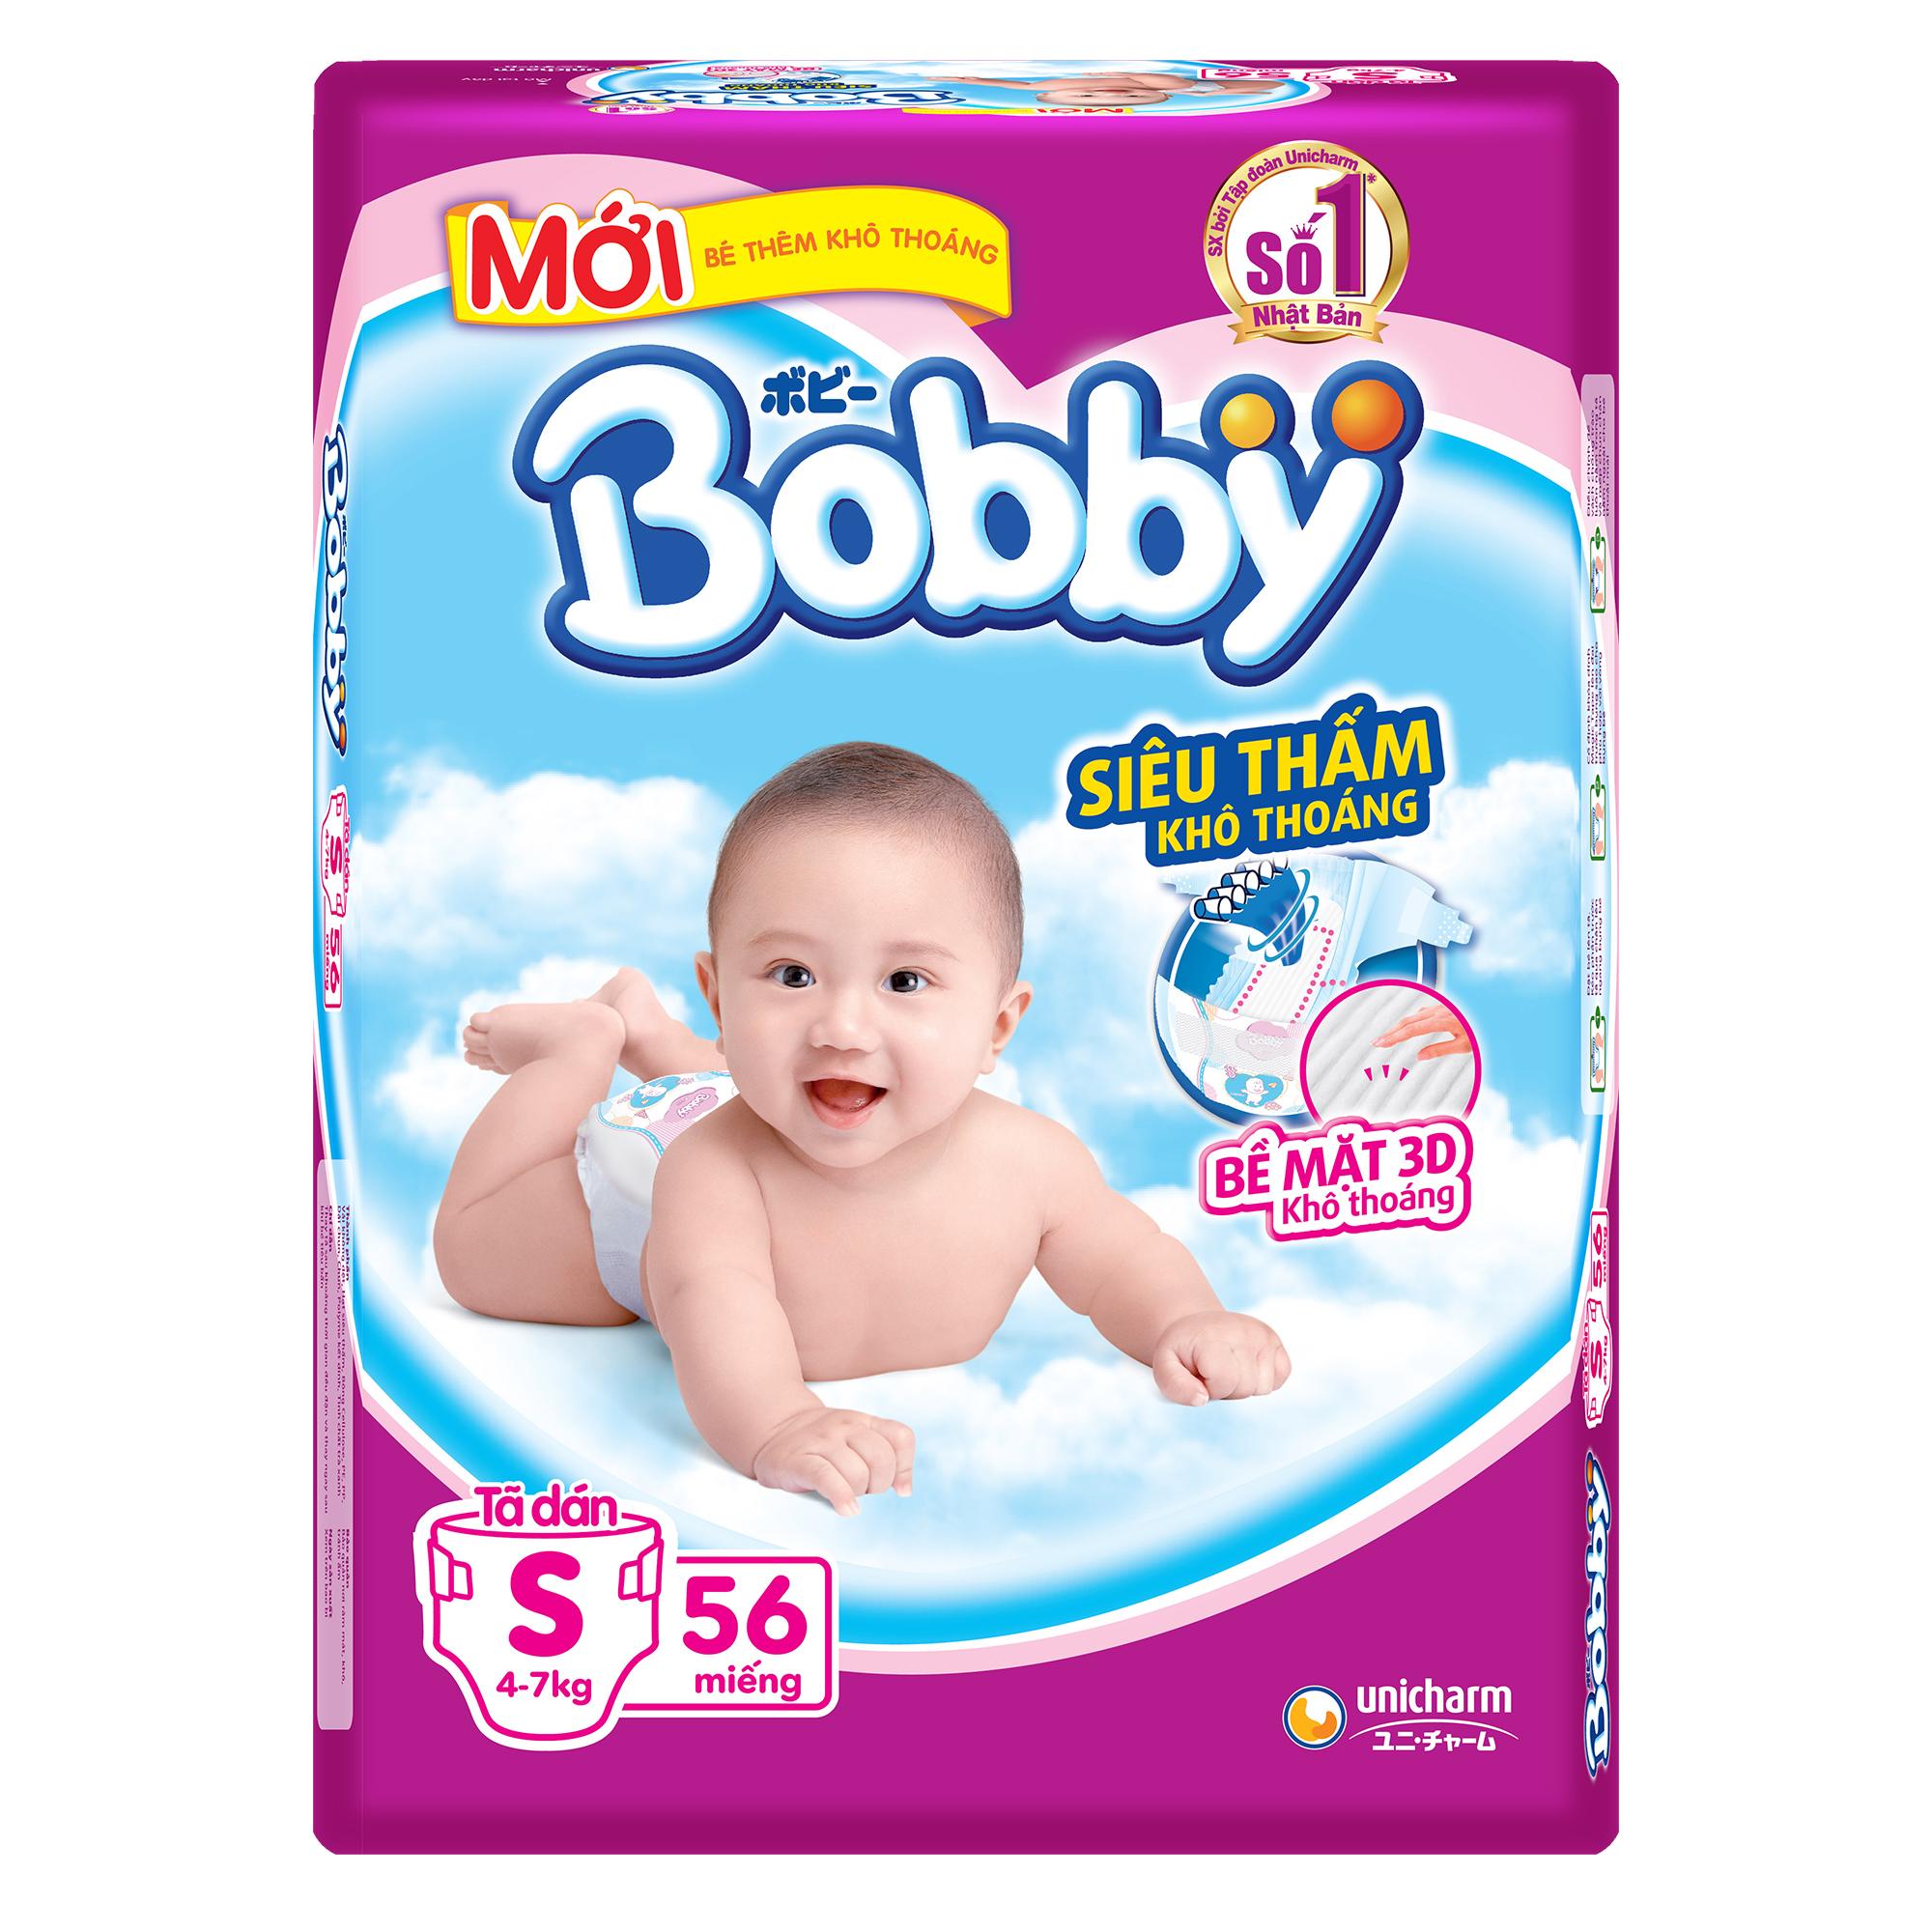 Bobby diapers  Fresh - 56pieces / bag -  S56- Extra thin (4-7kg)